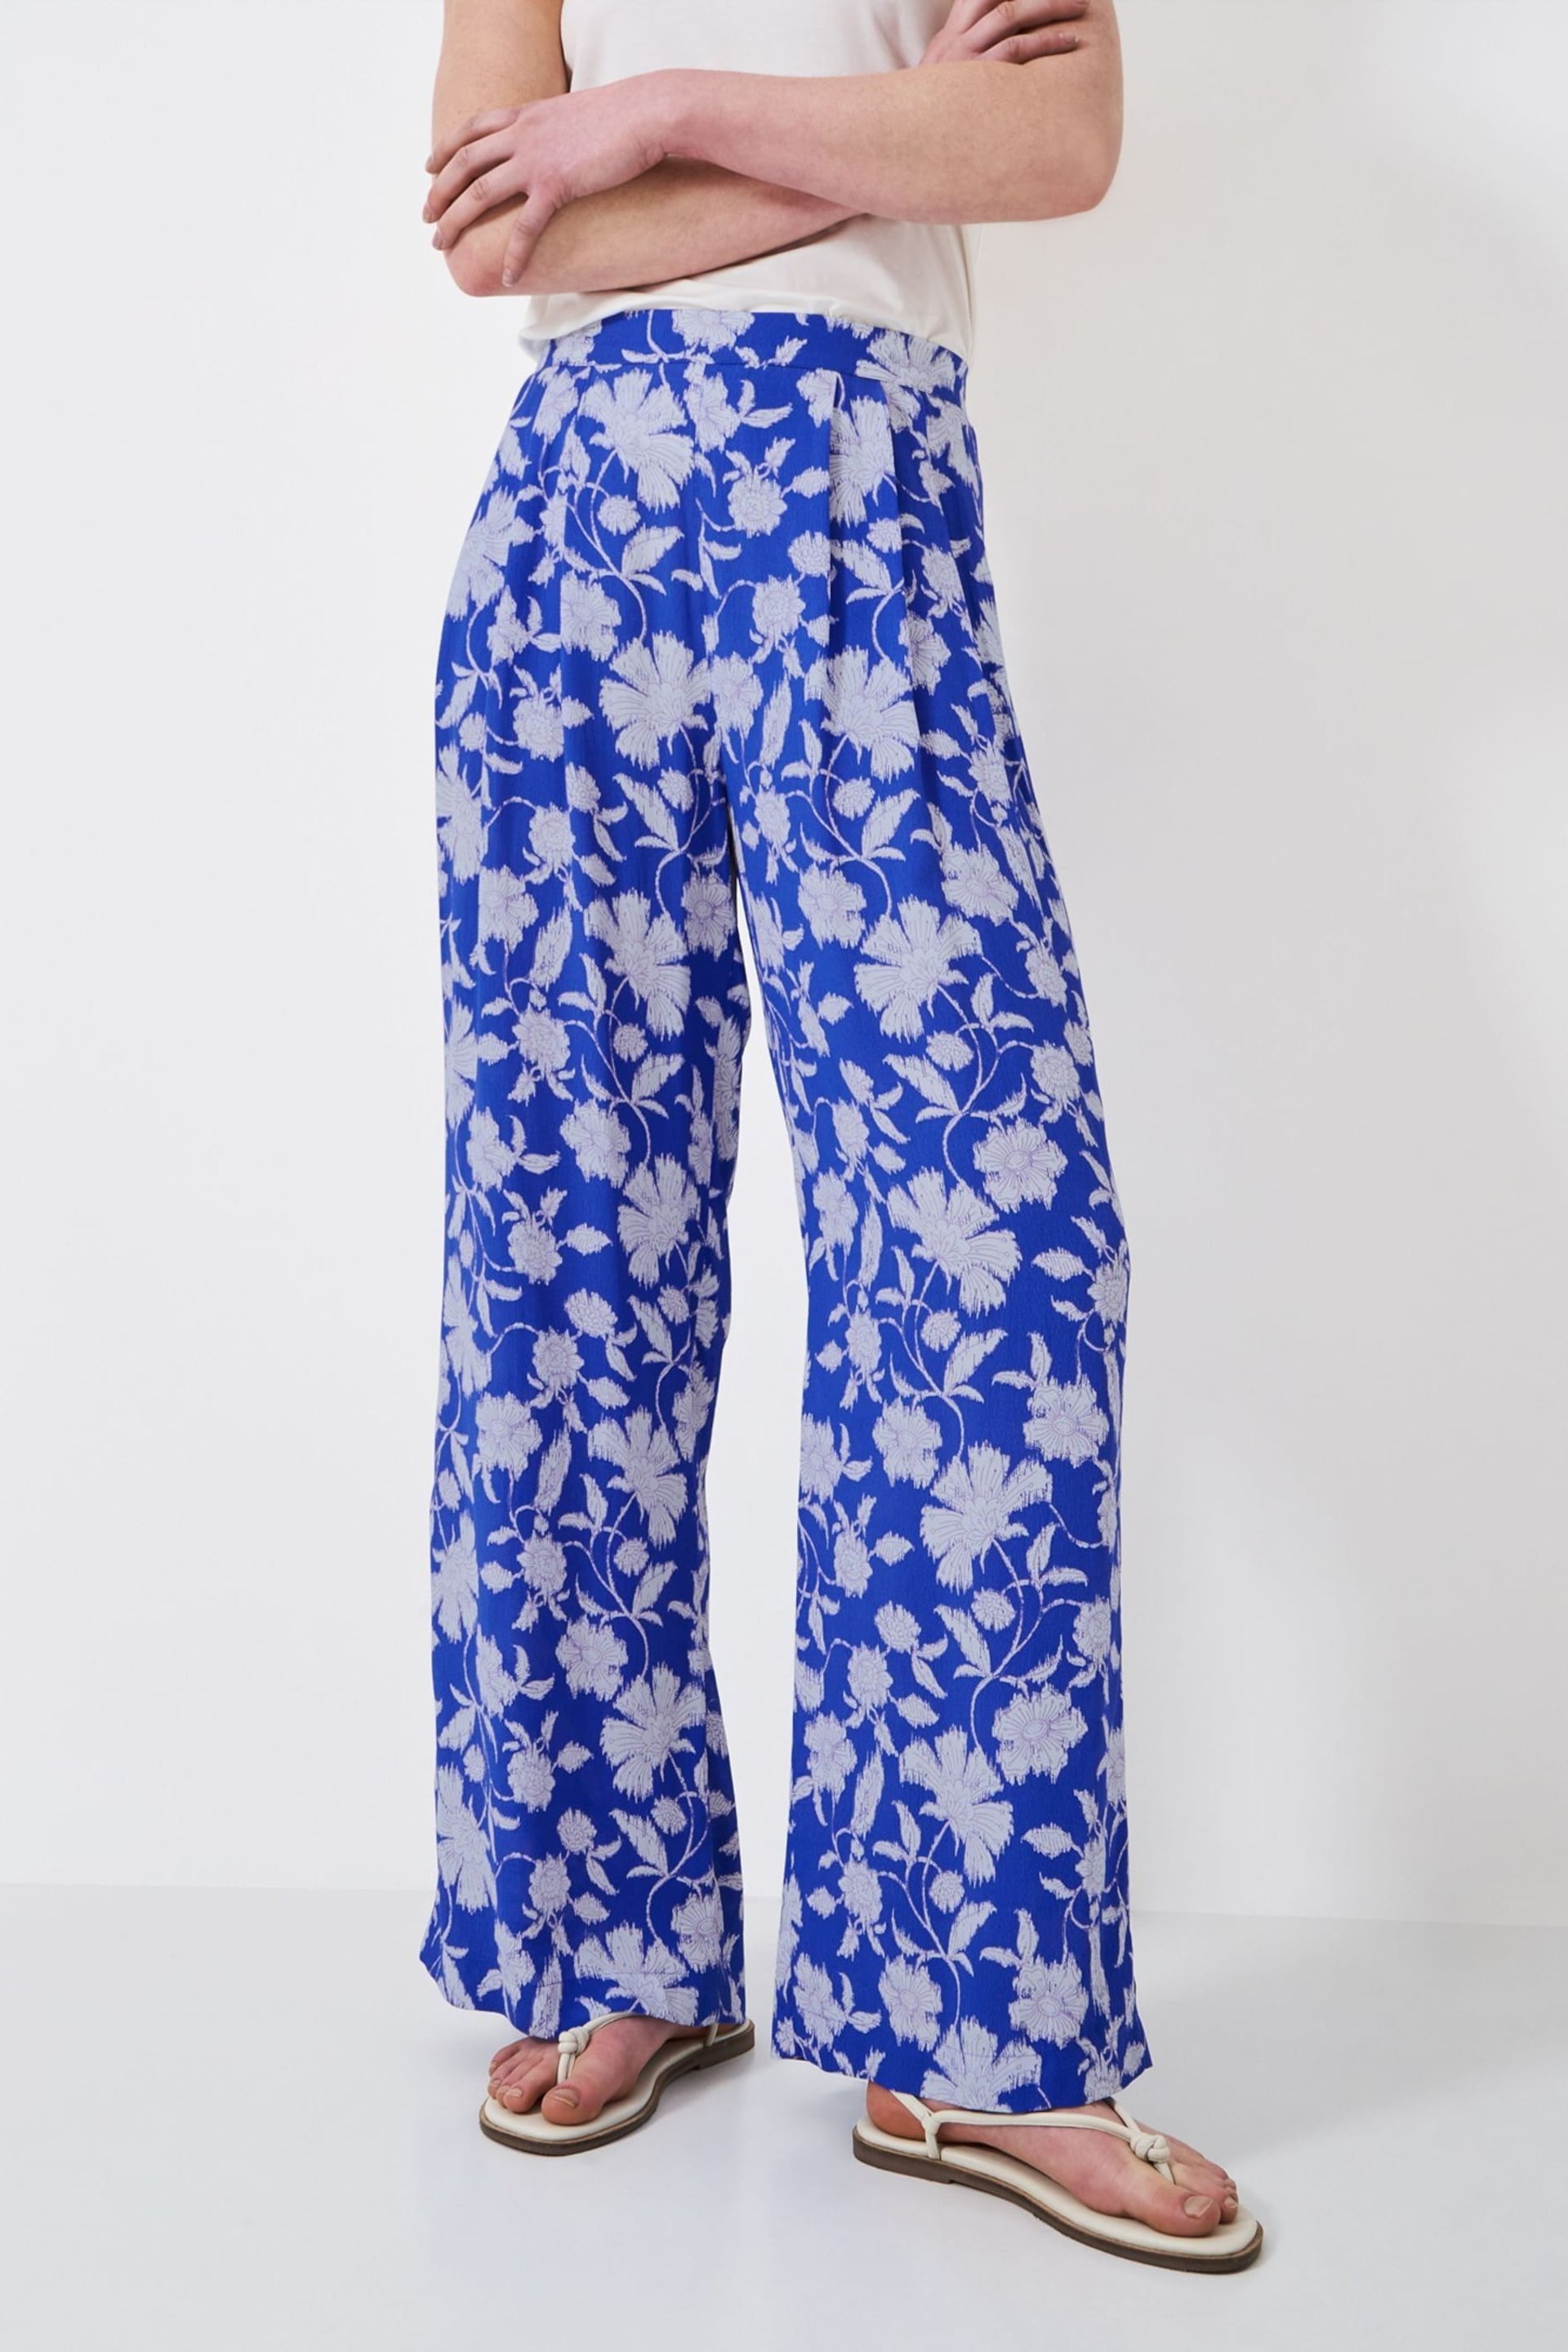 Crew Clothing Company Blue Floral Cotton Relaxed Casual Trousers - Image 3 of 4